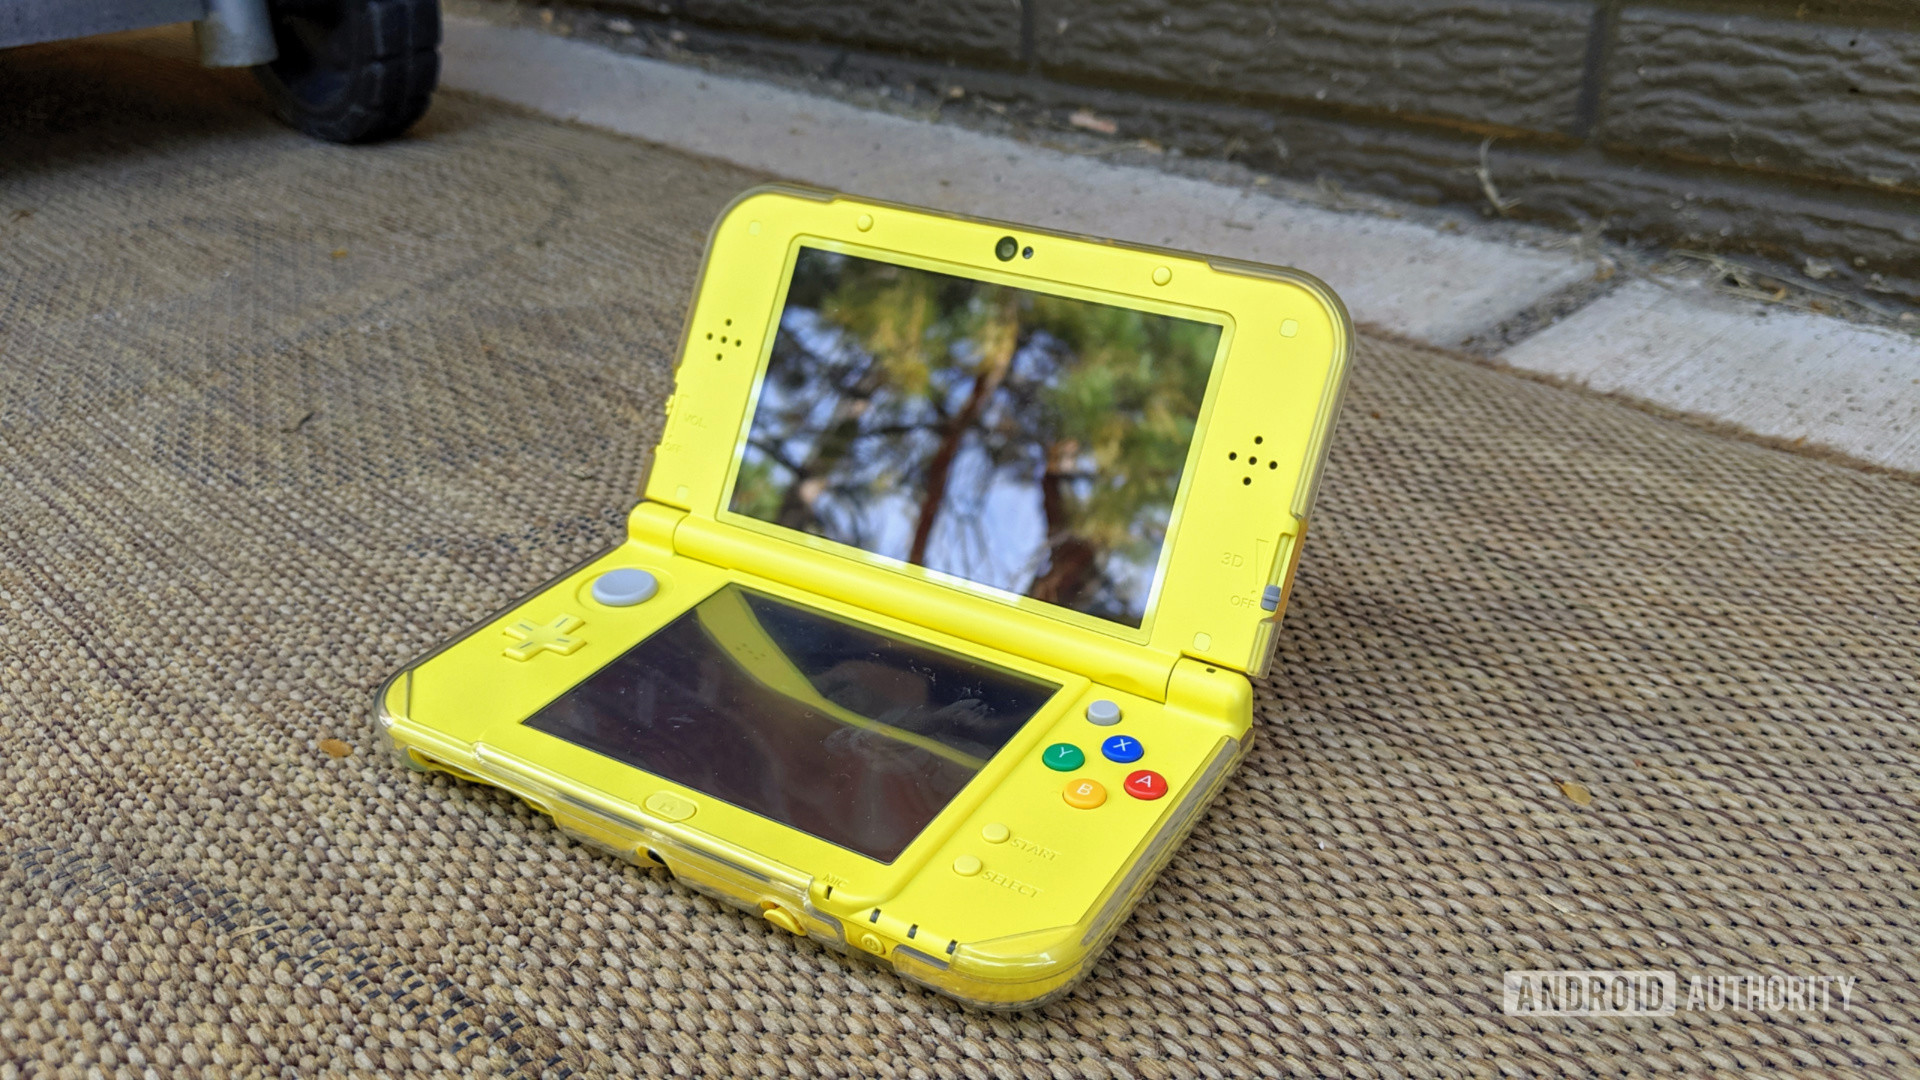 New Nintendo 3DS XL outside